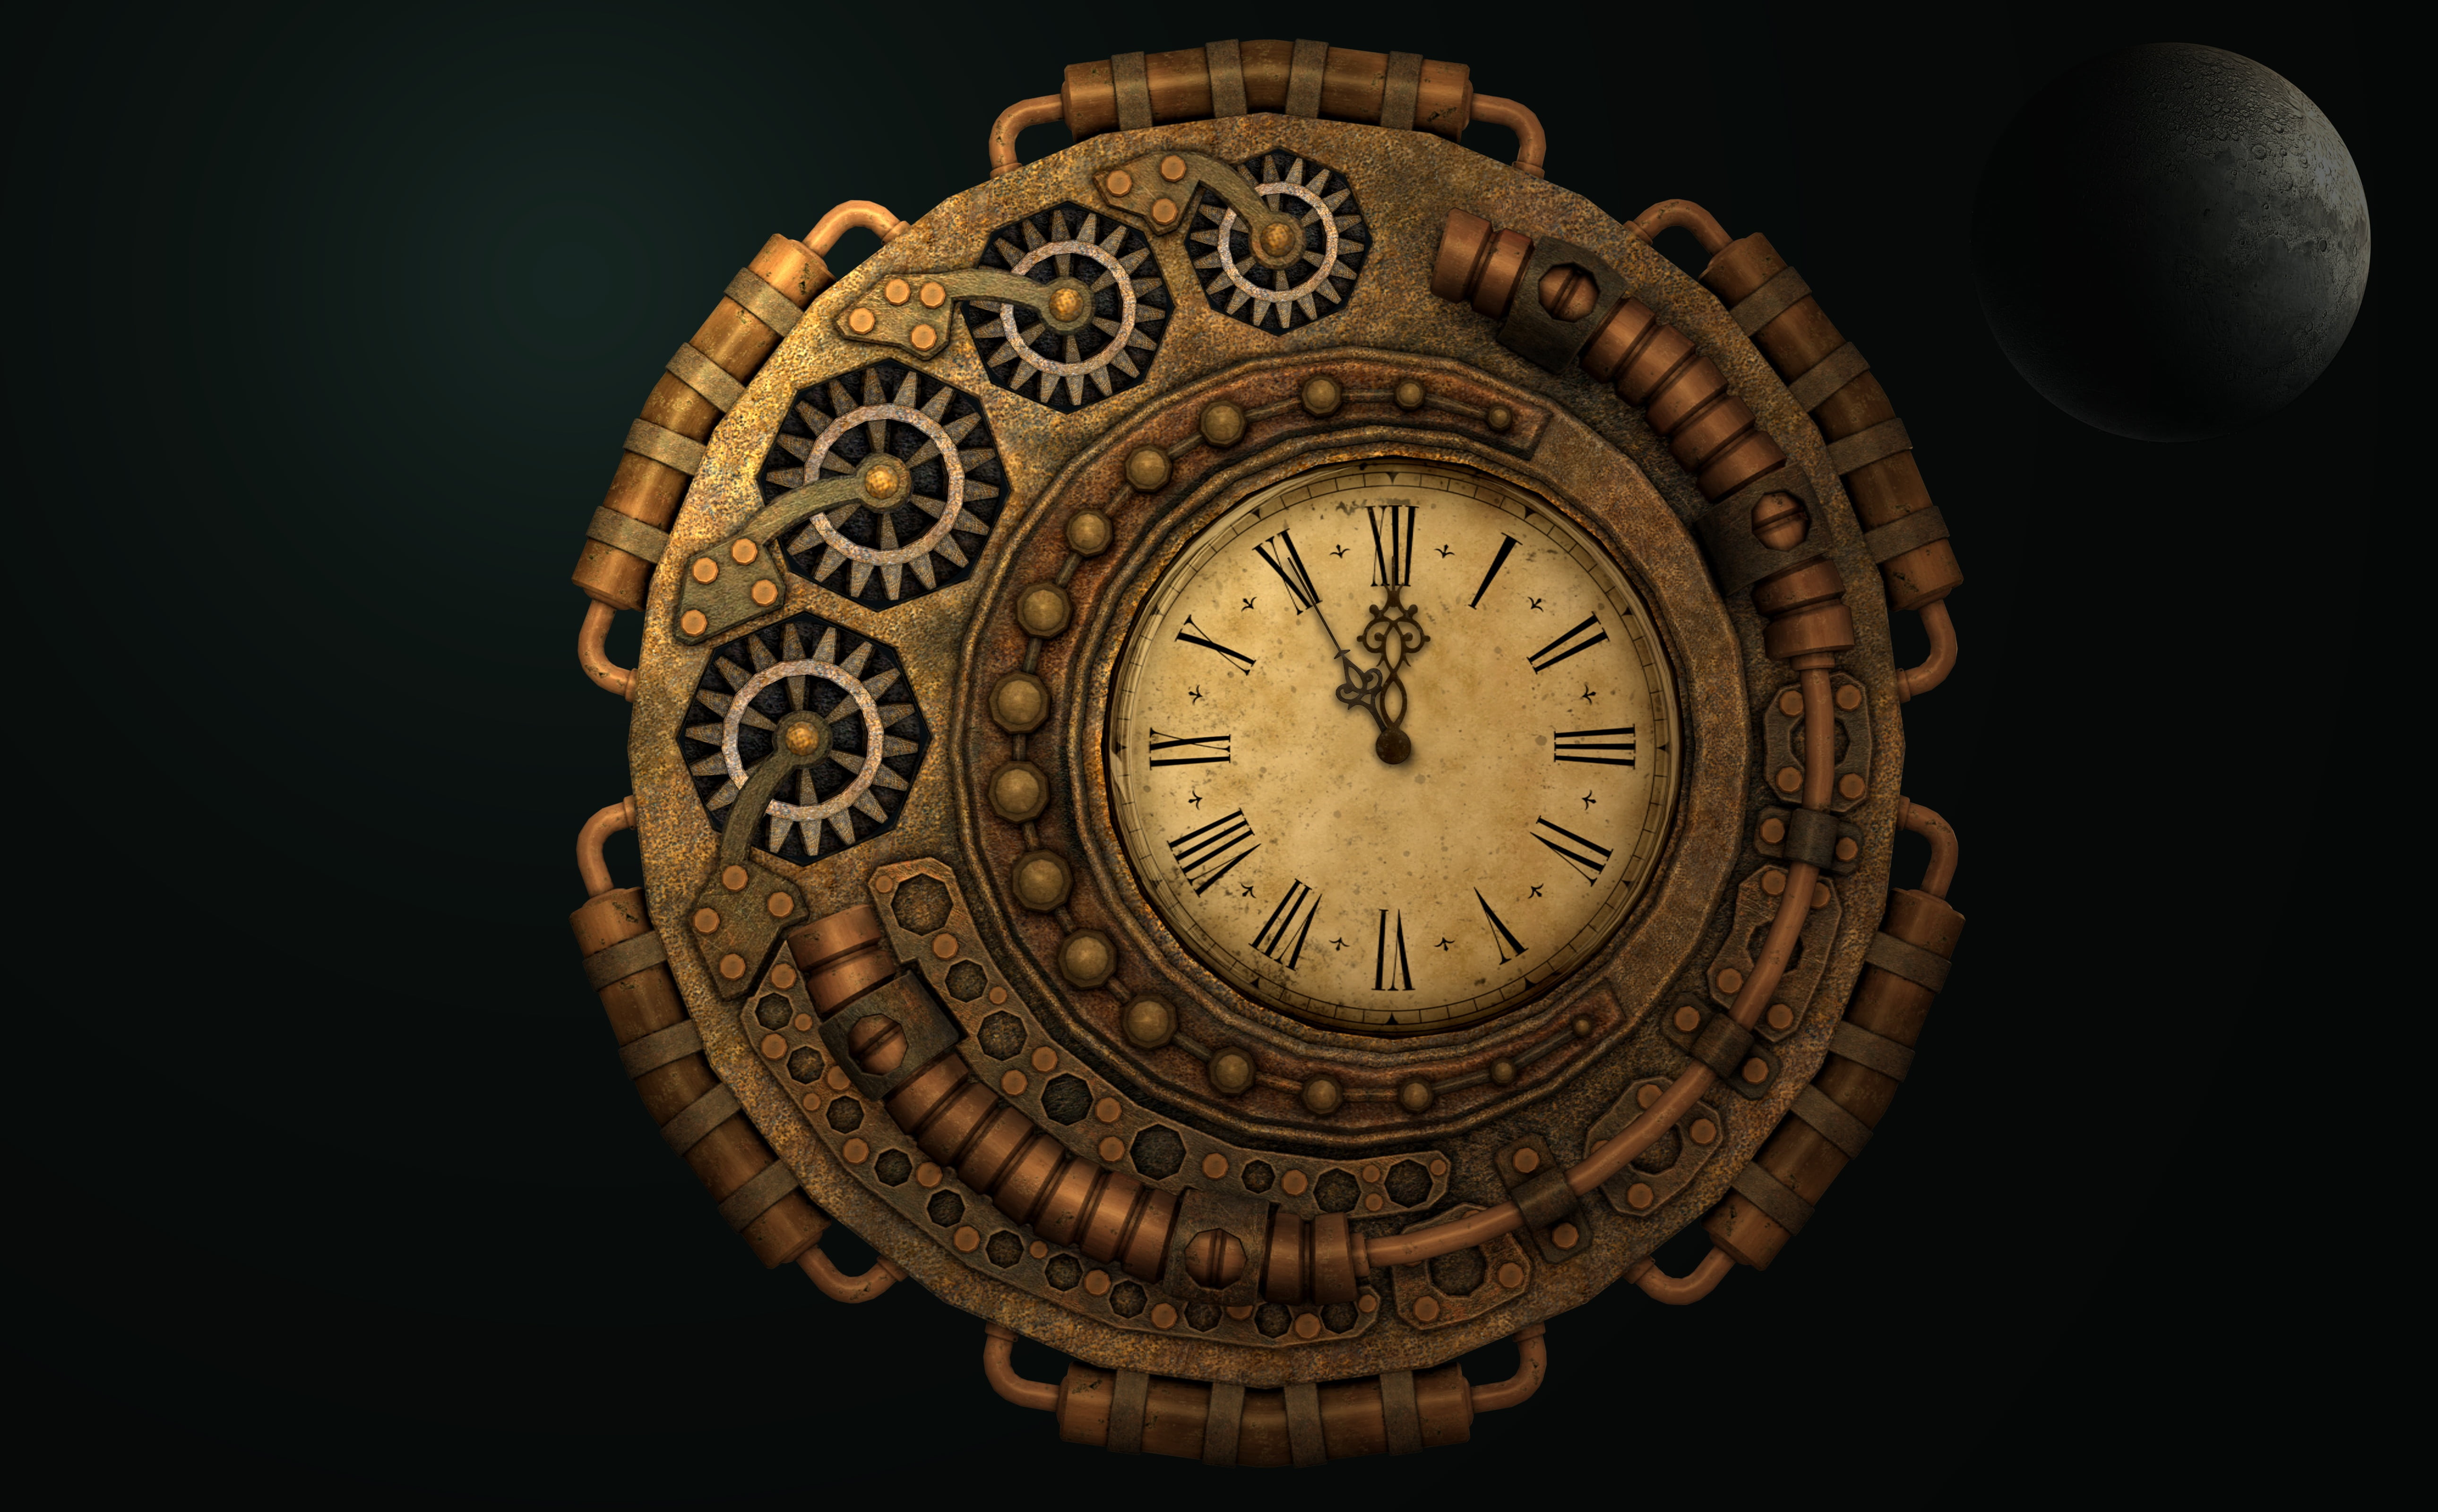 roman numerical clock at 11:55, time, moondial, time machine